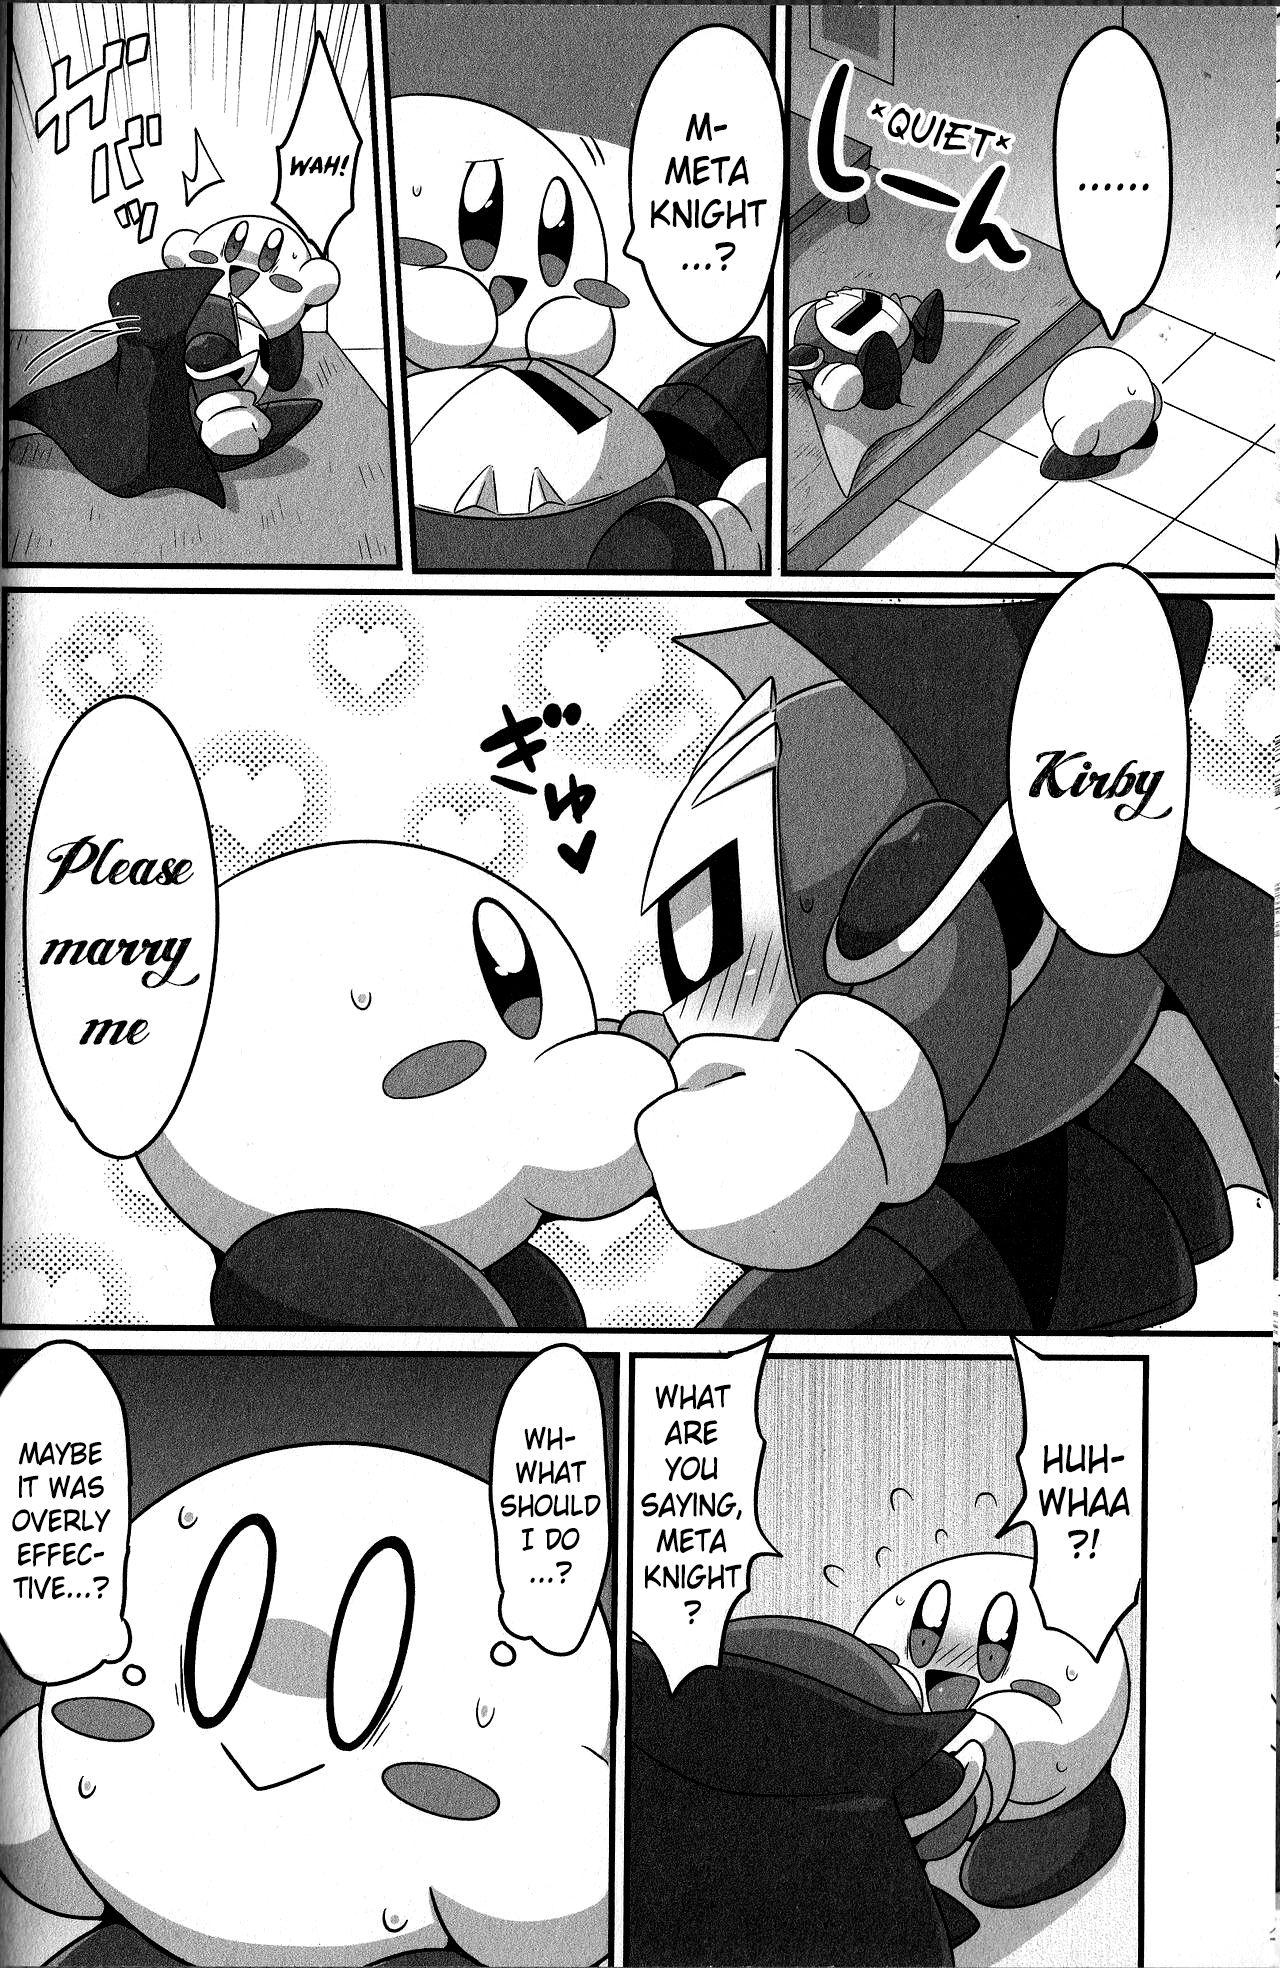 Rica I Want to Do XXX Even For Spheres! - Kirby Teen Hardcore - Page 9